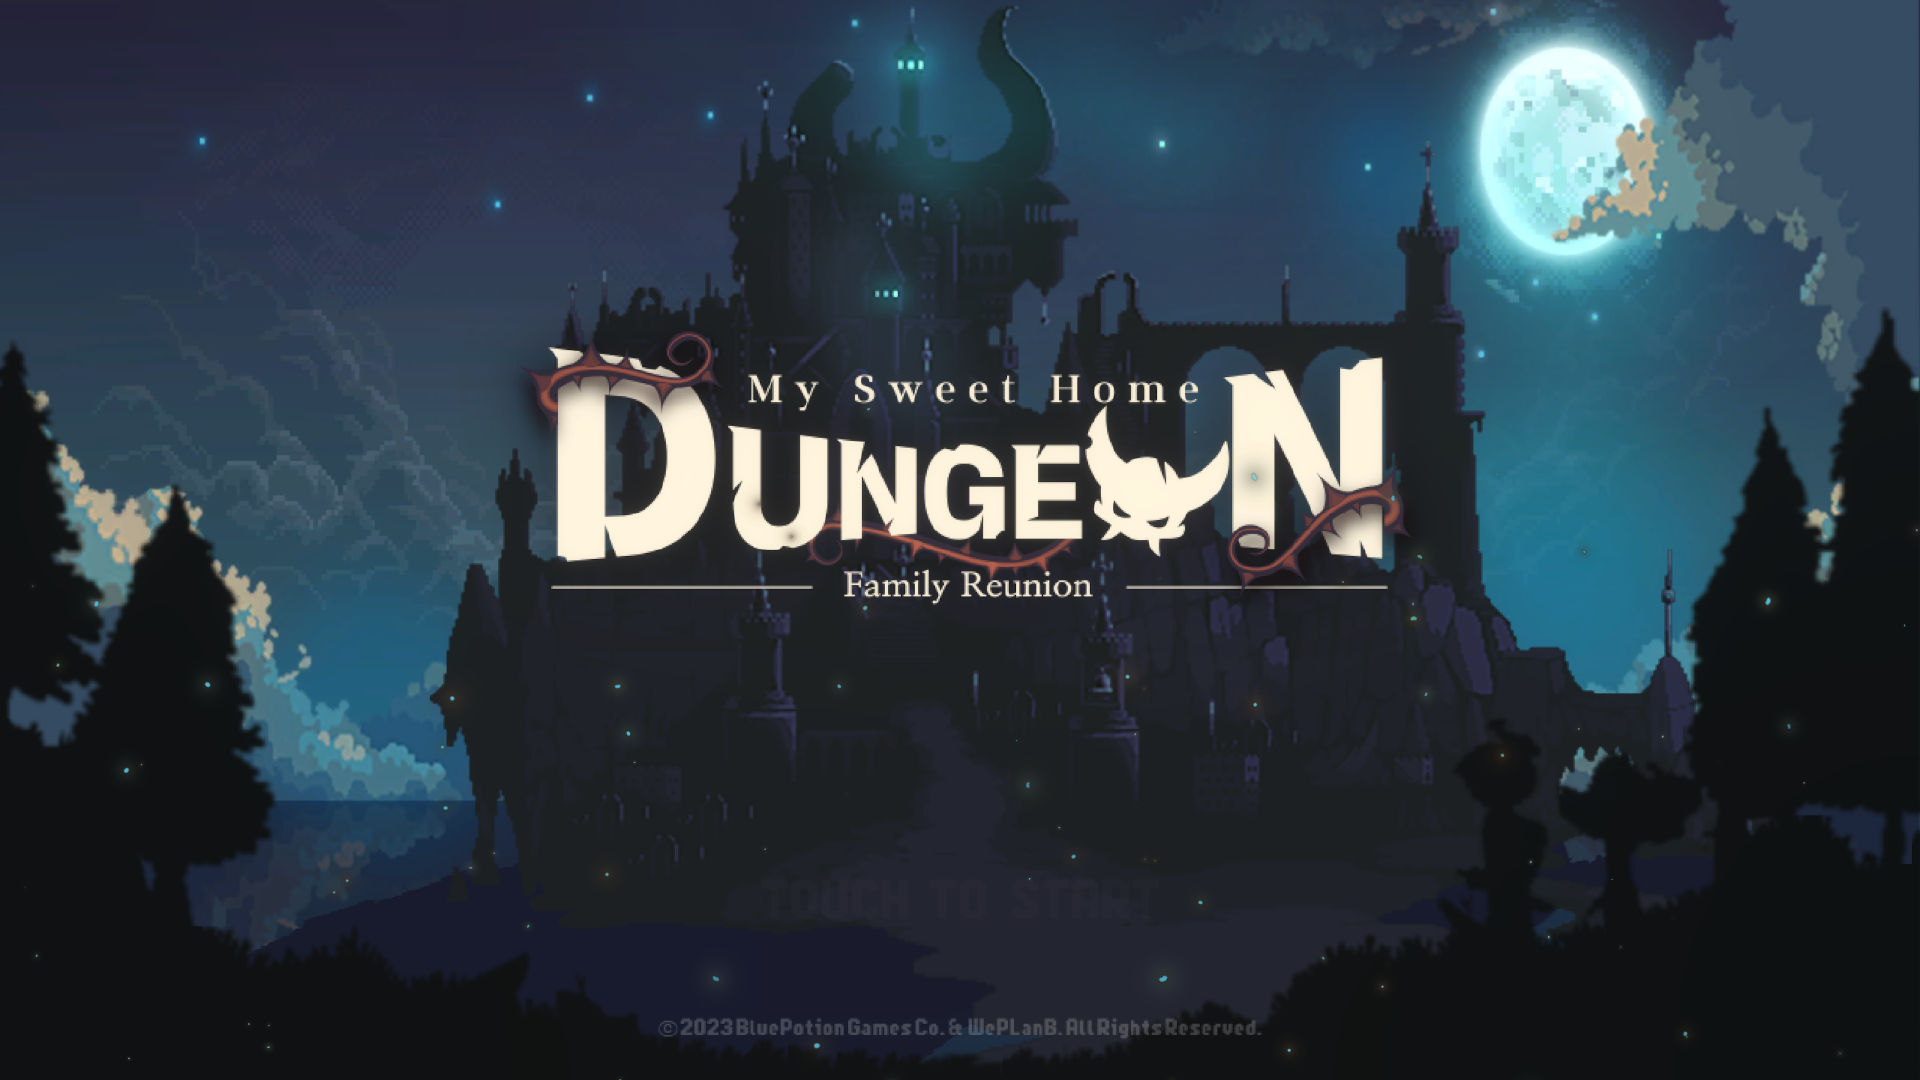 The official logo for My Sweet Home Dungeon, depicting a dungeon at night.